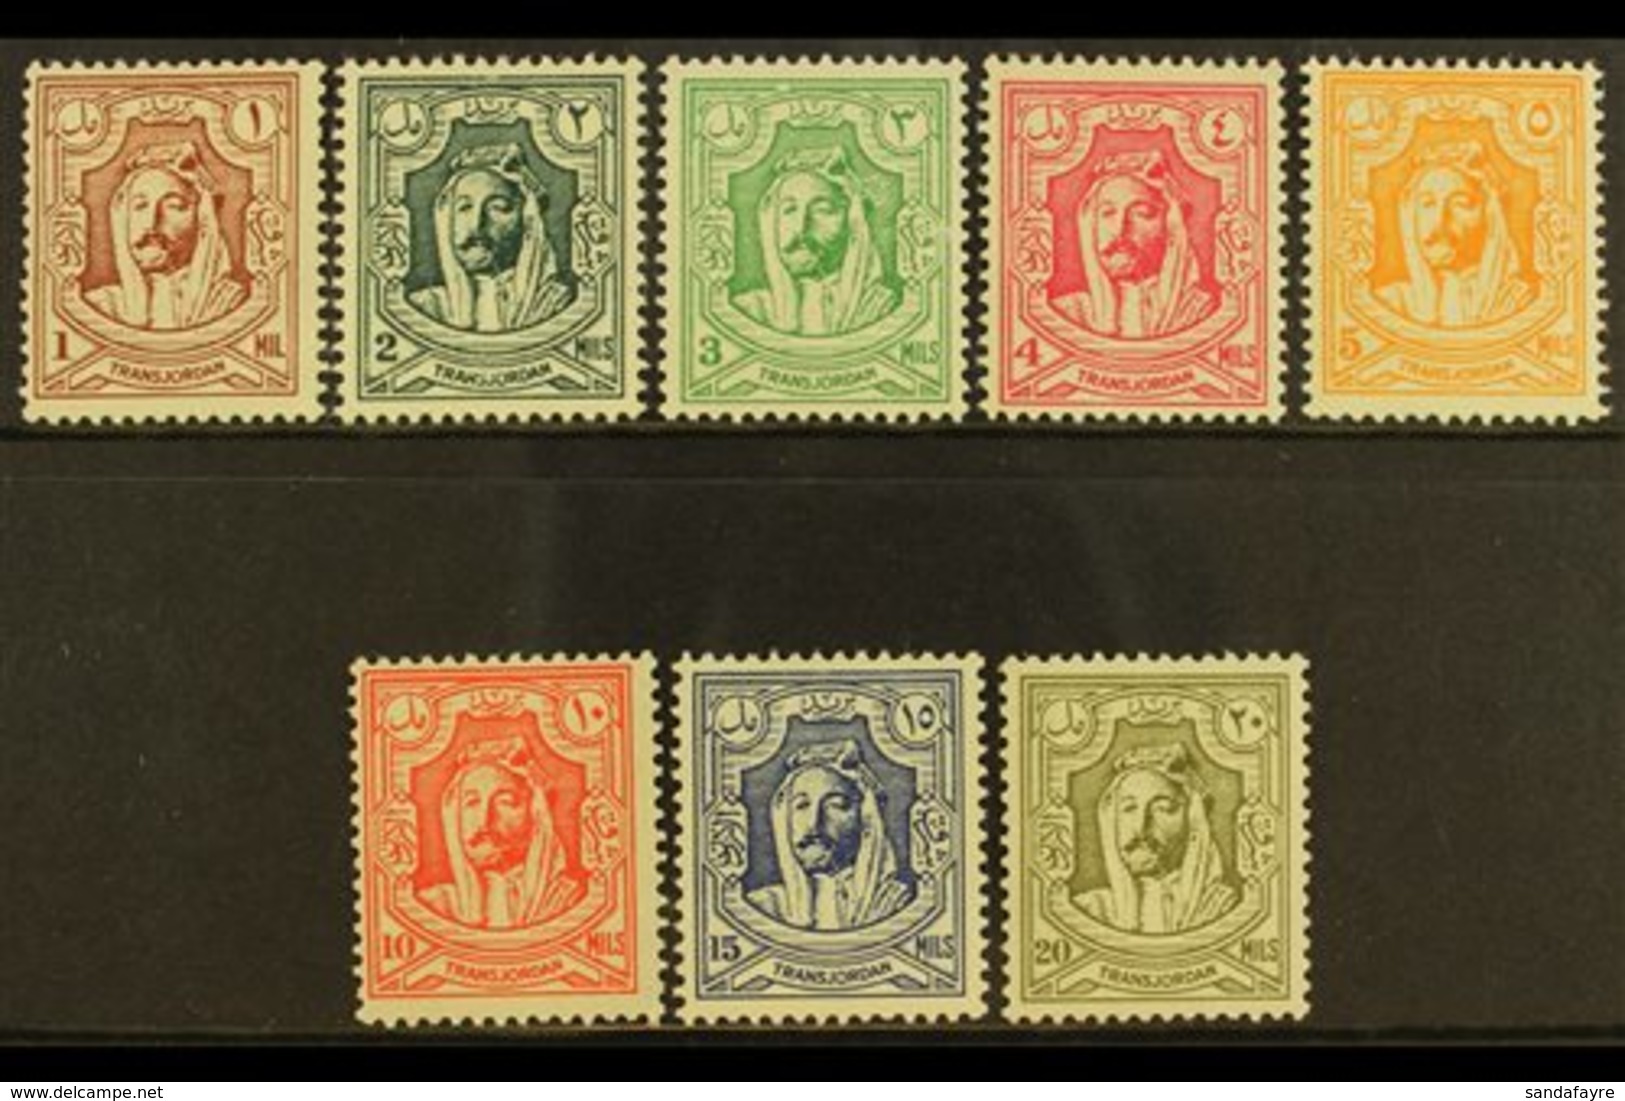 1942  Emir Set, Lithographed, SG 222/9, Very Fine And Fresh Mint. (8 Stamps) For More Images, Please Visit Http://www.sa - Jordan